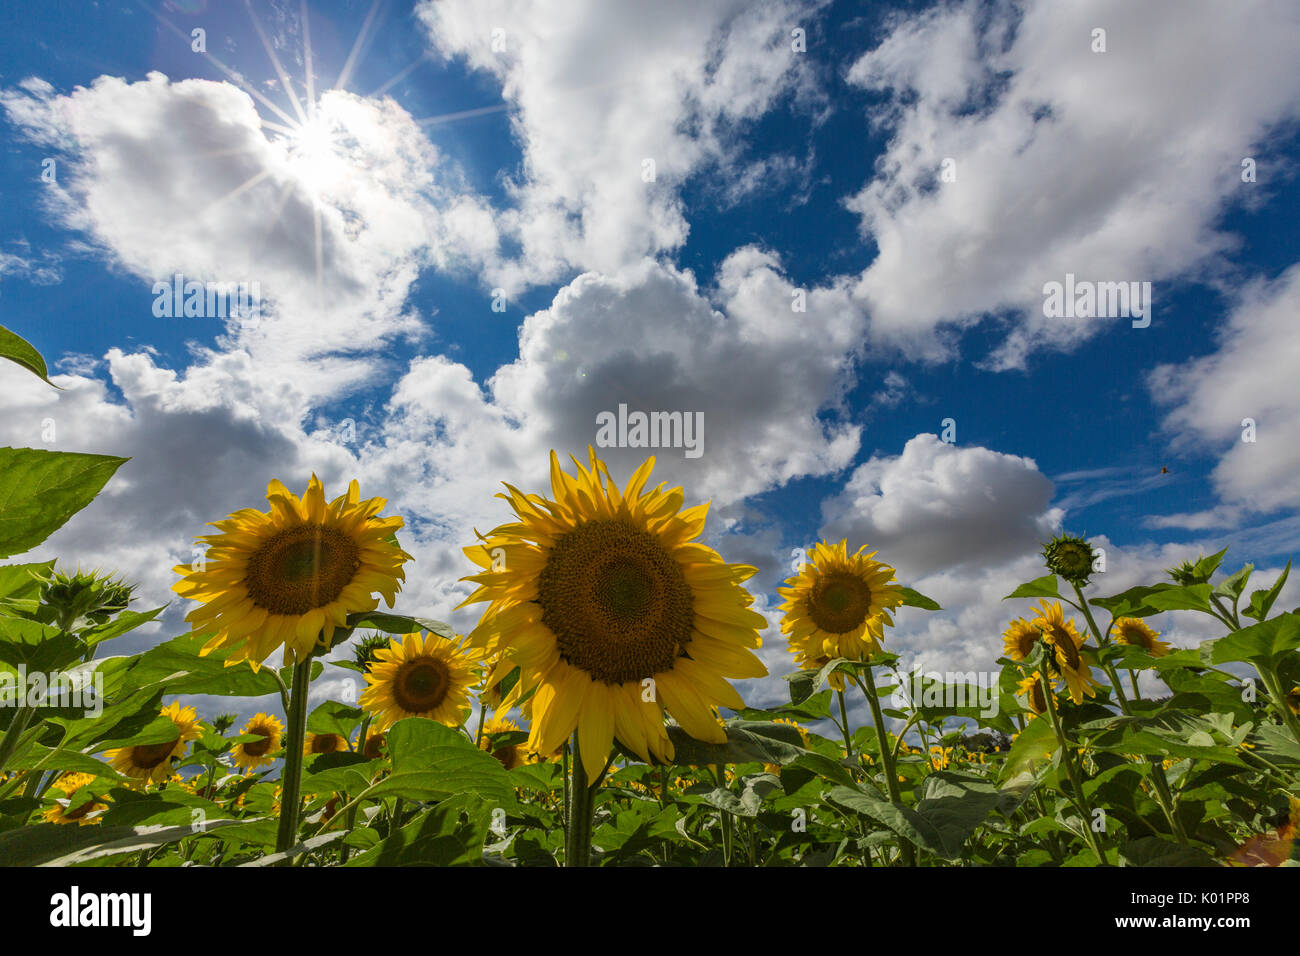 Sunflowers and clouds in the rural landscape of Senigallia province of Ancona Marche Italy Europe Stock Photo